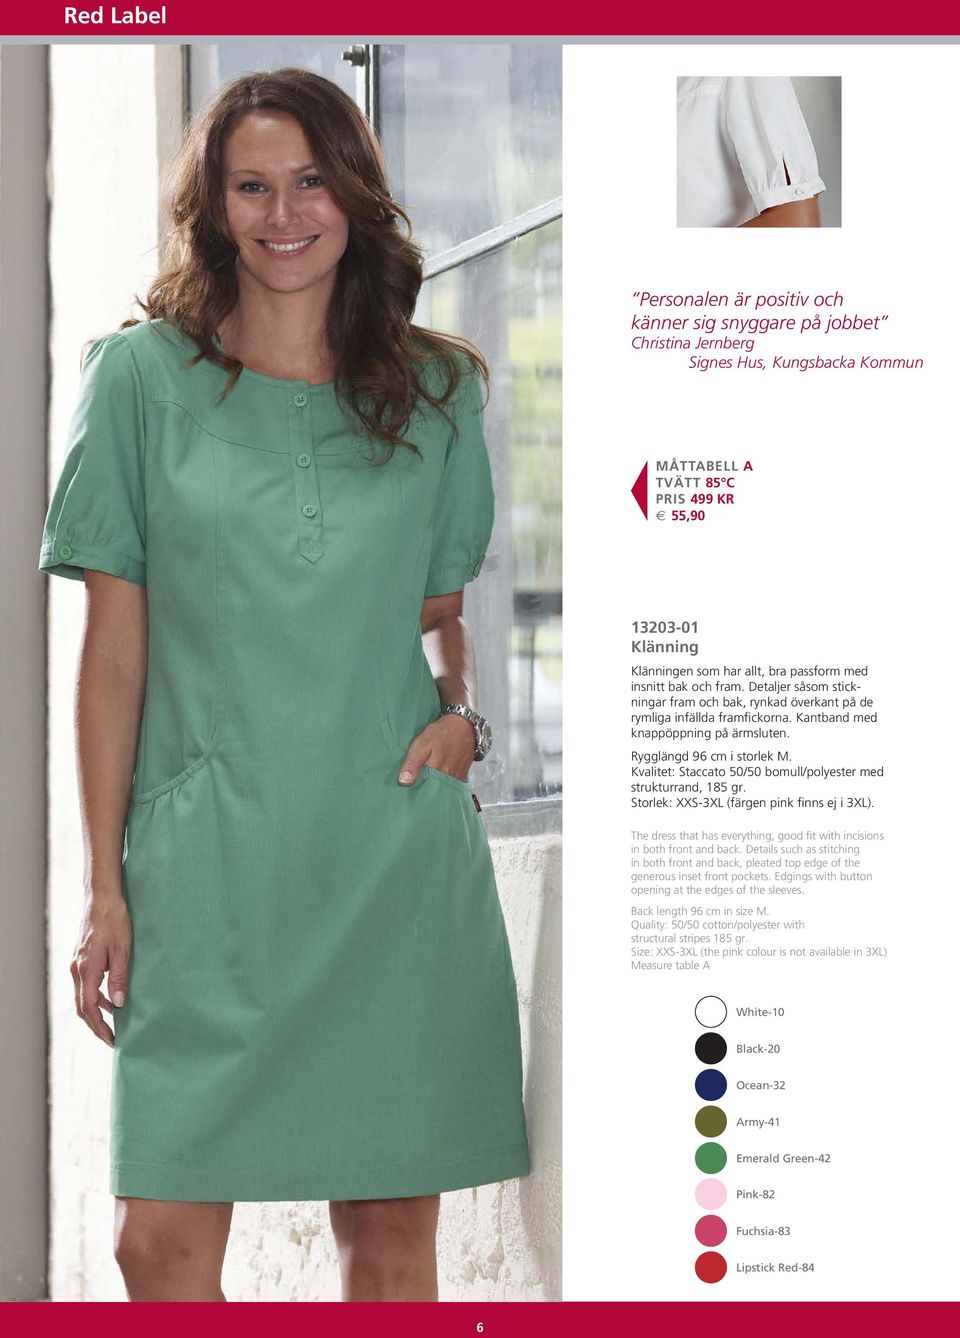 Kvalitet: Staccato 50/50 bomull/poly ester med strukturrand, 185 gr. Storlek: XXS-3XL (färgen pink finns ej i 3XL). The dress that has everything, good fit with incisions in both front and back.